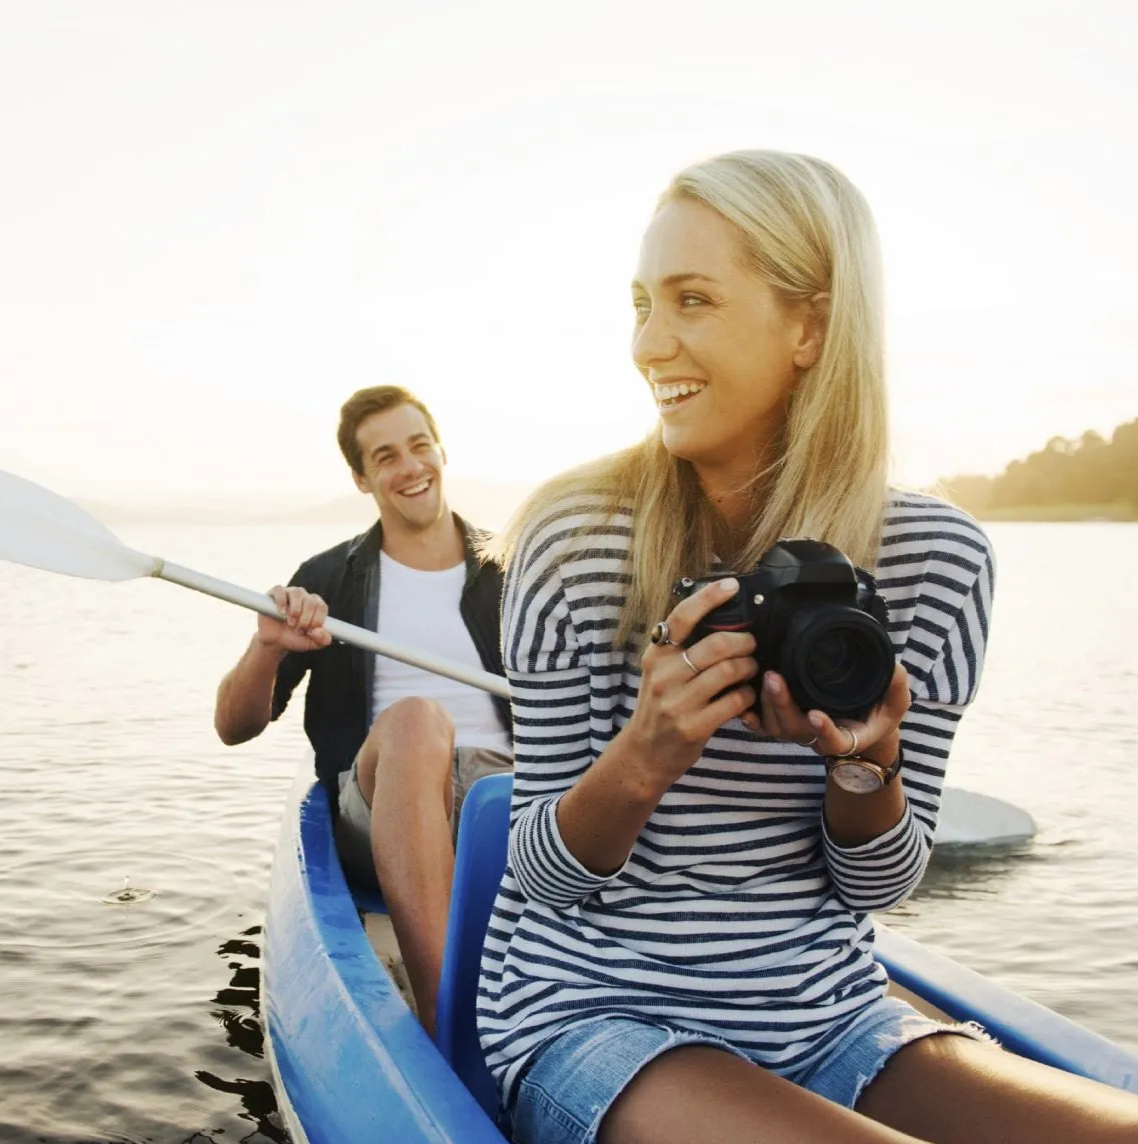 Woman with a camera and man with an oar in a canoe on lake during sunset